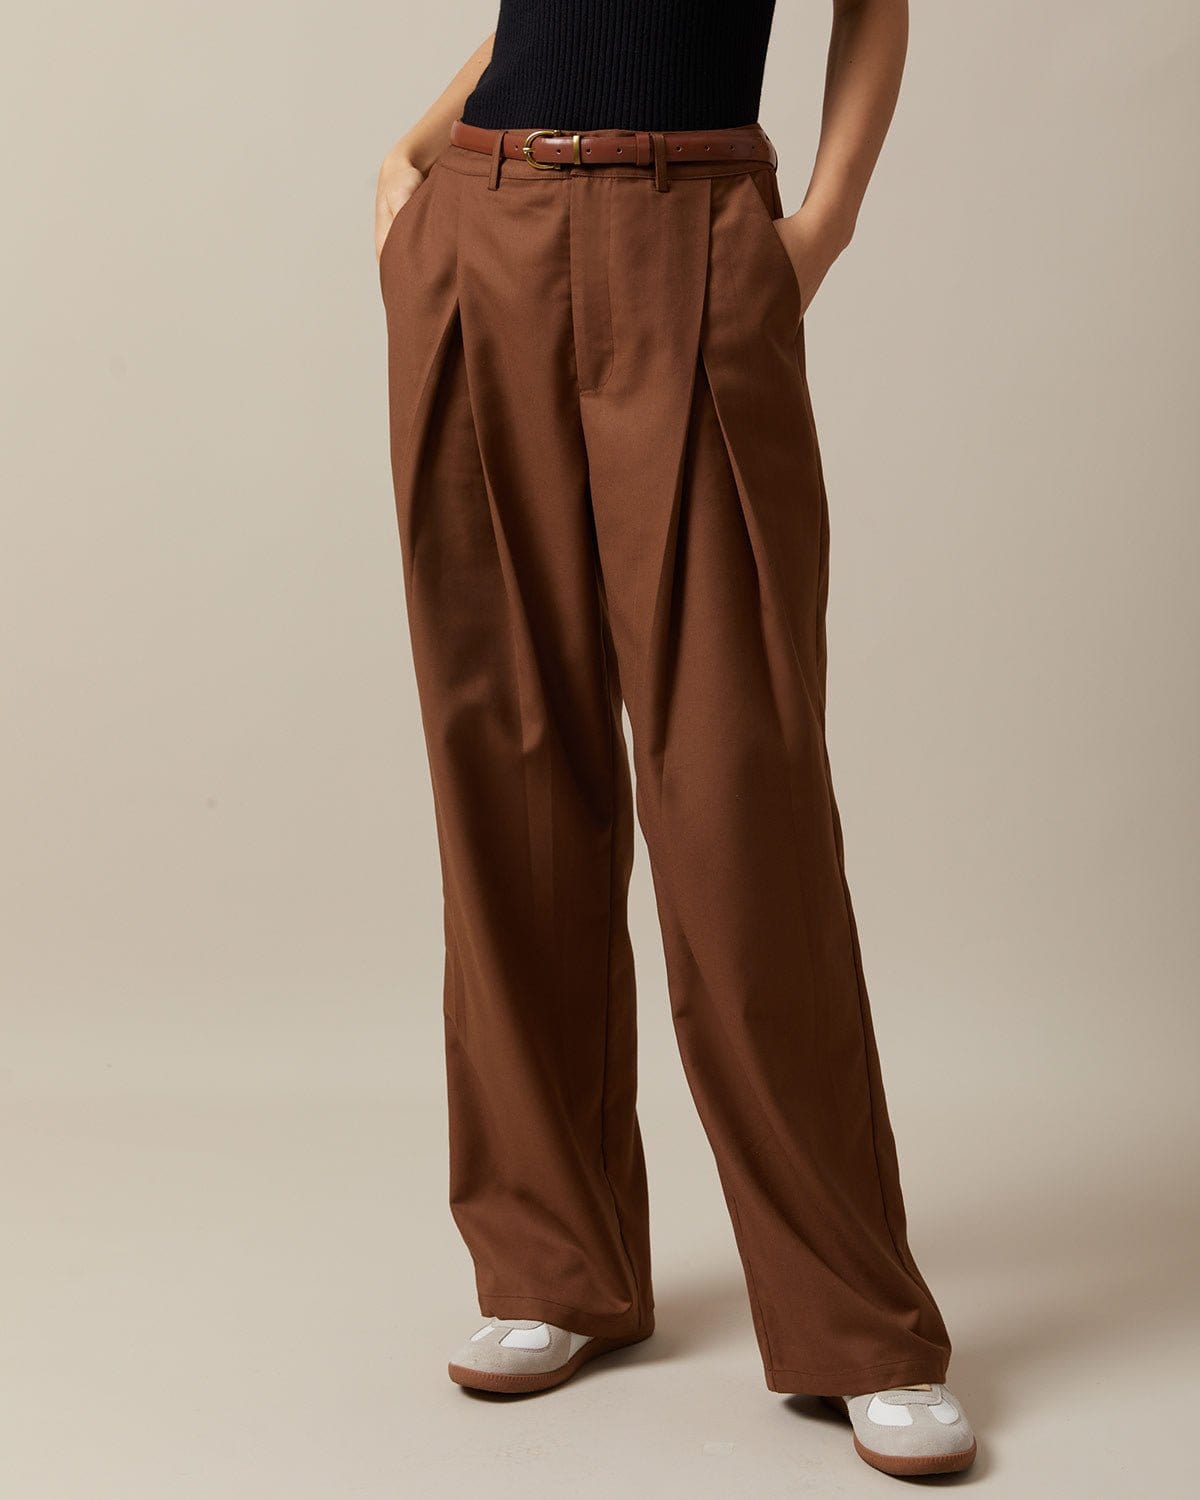 The Brown High Waisted Pleated Straight Pants - Women's High